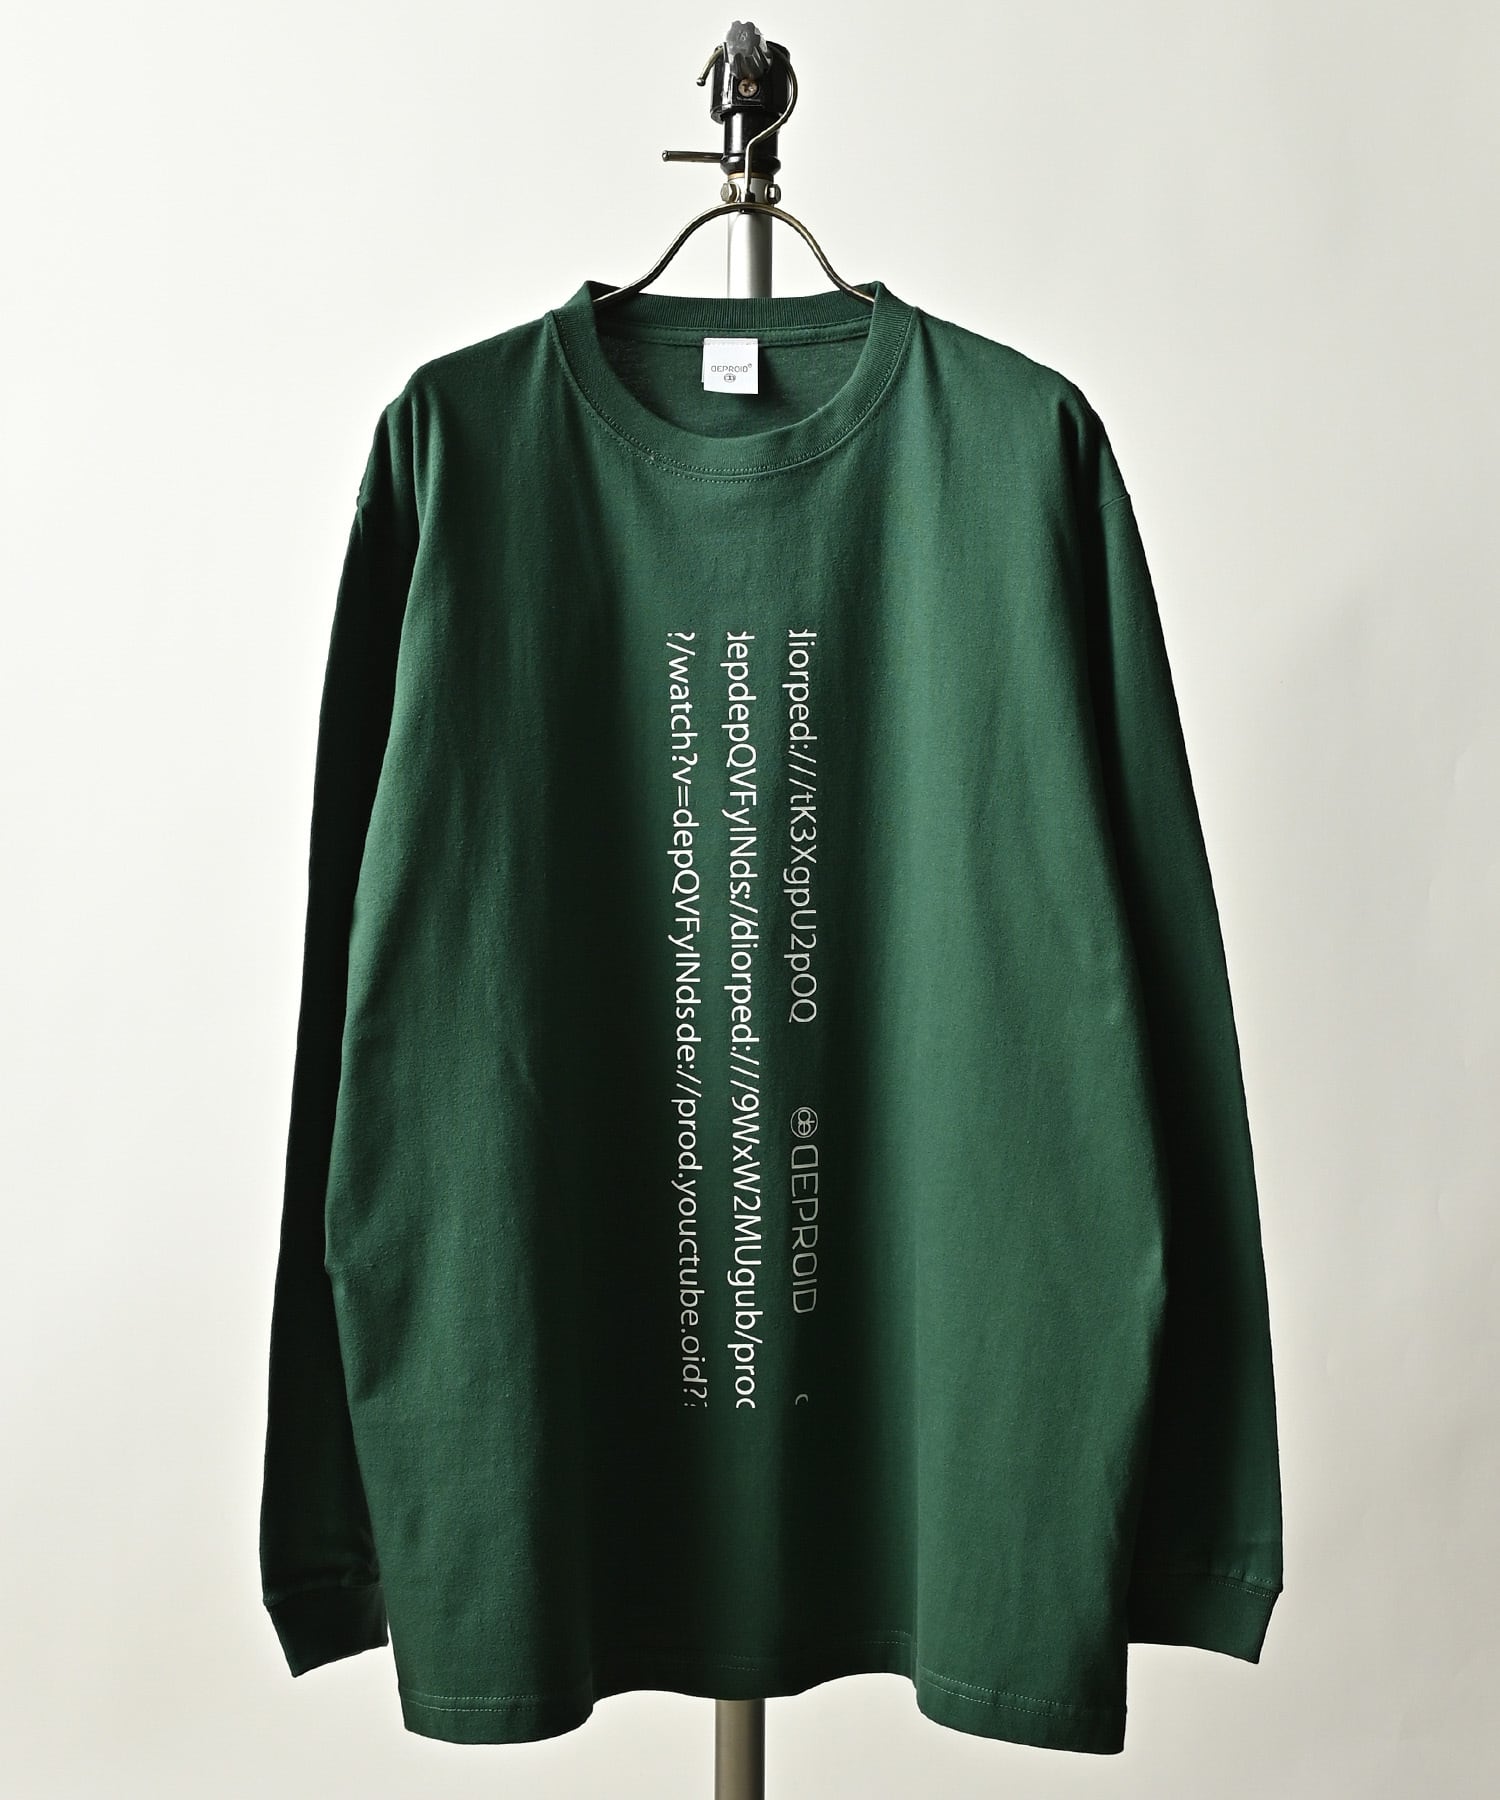 DEPROID×Itaru Pudding girl L/S TEE (GRN) DP-246 | DEPROID OFFICIAL EC